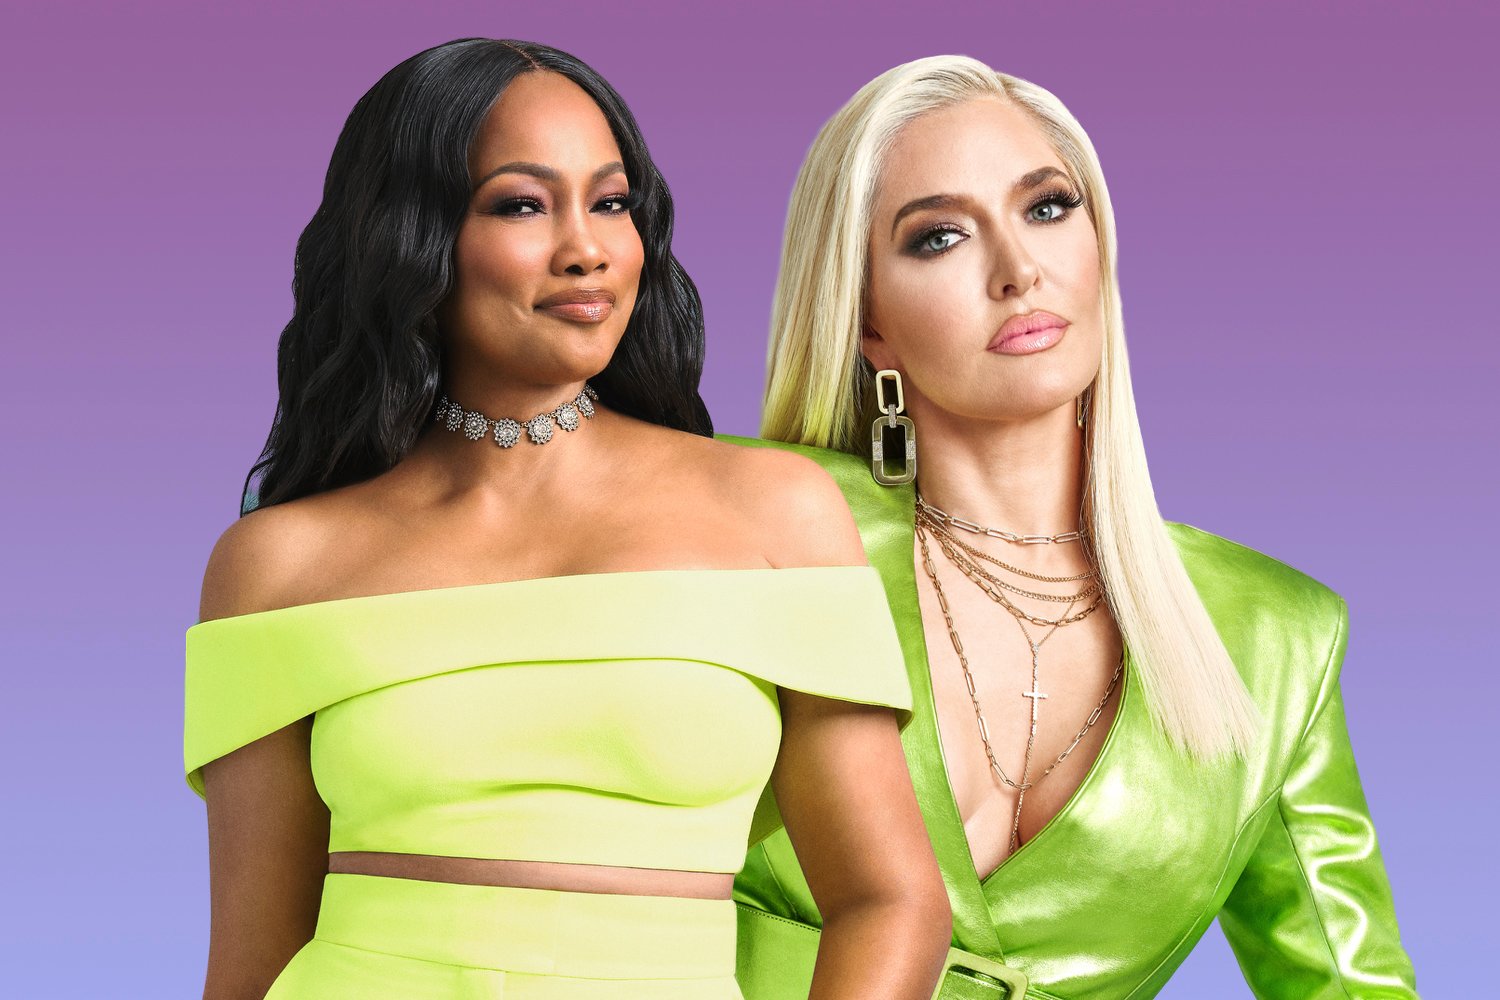 Garcelle Beauvais and Erika Jayne in their official 'RHOBH' portraits wearing neon green outfits